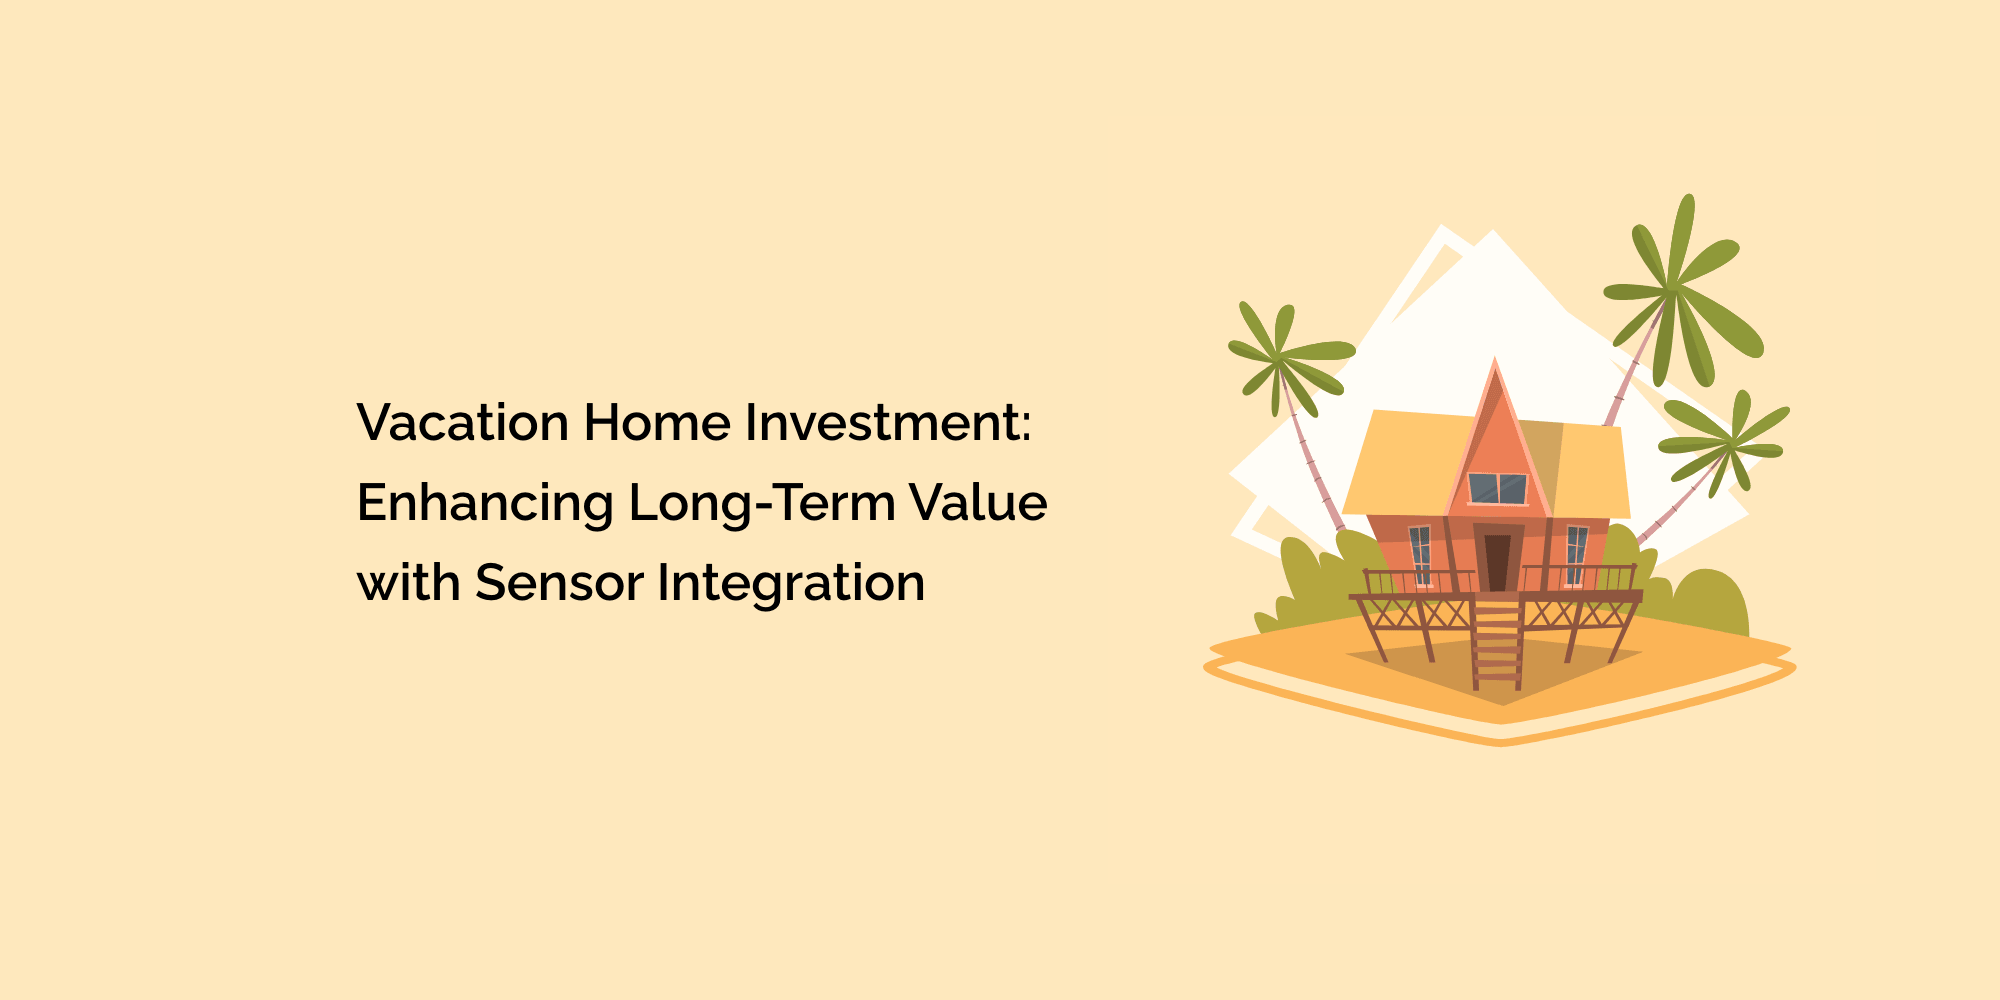 Vacation Home Investment: Enhancing Long-Term Value with Sensor Integration